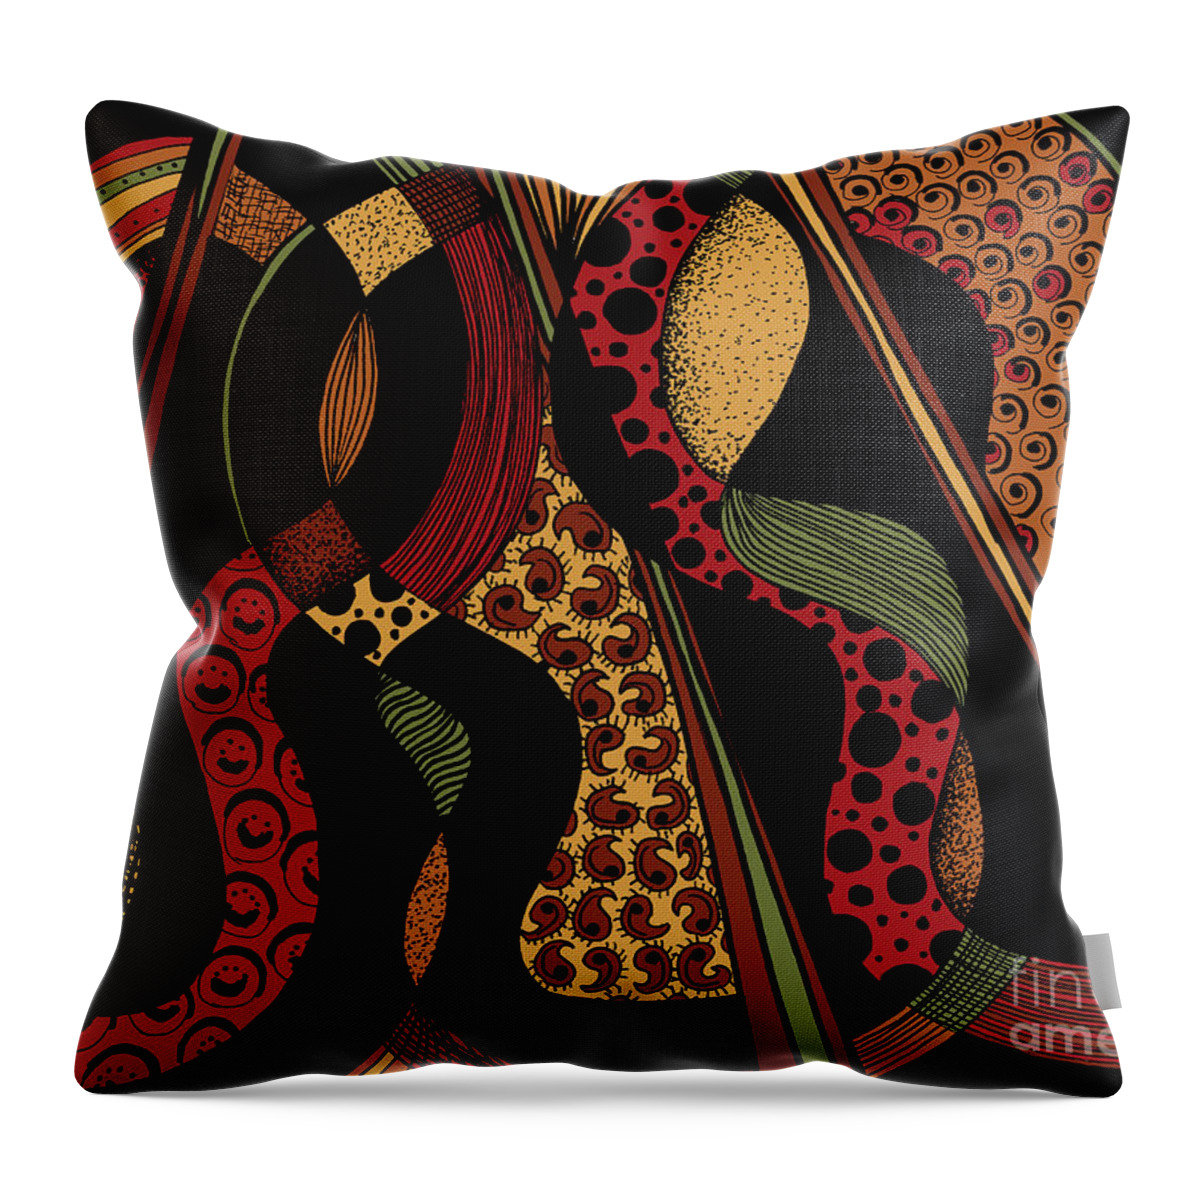 Stringed Instruments Throw Pillow featuring the digital art String Section by Lynellen Nielsen